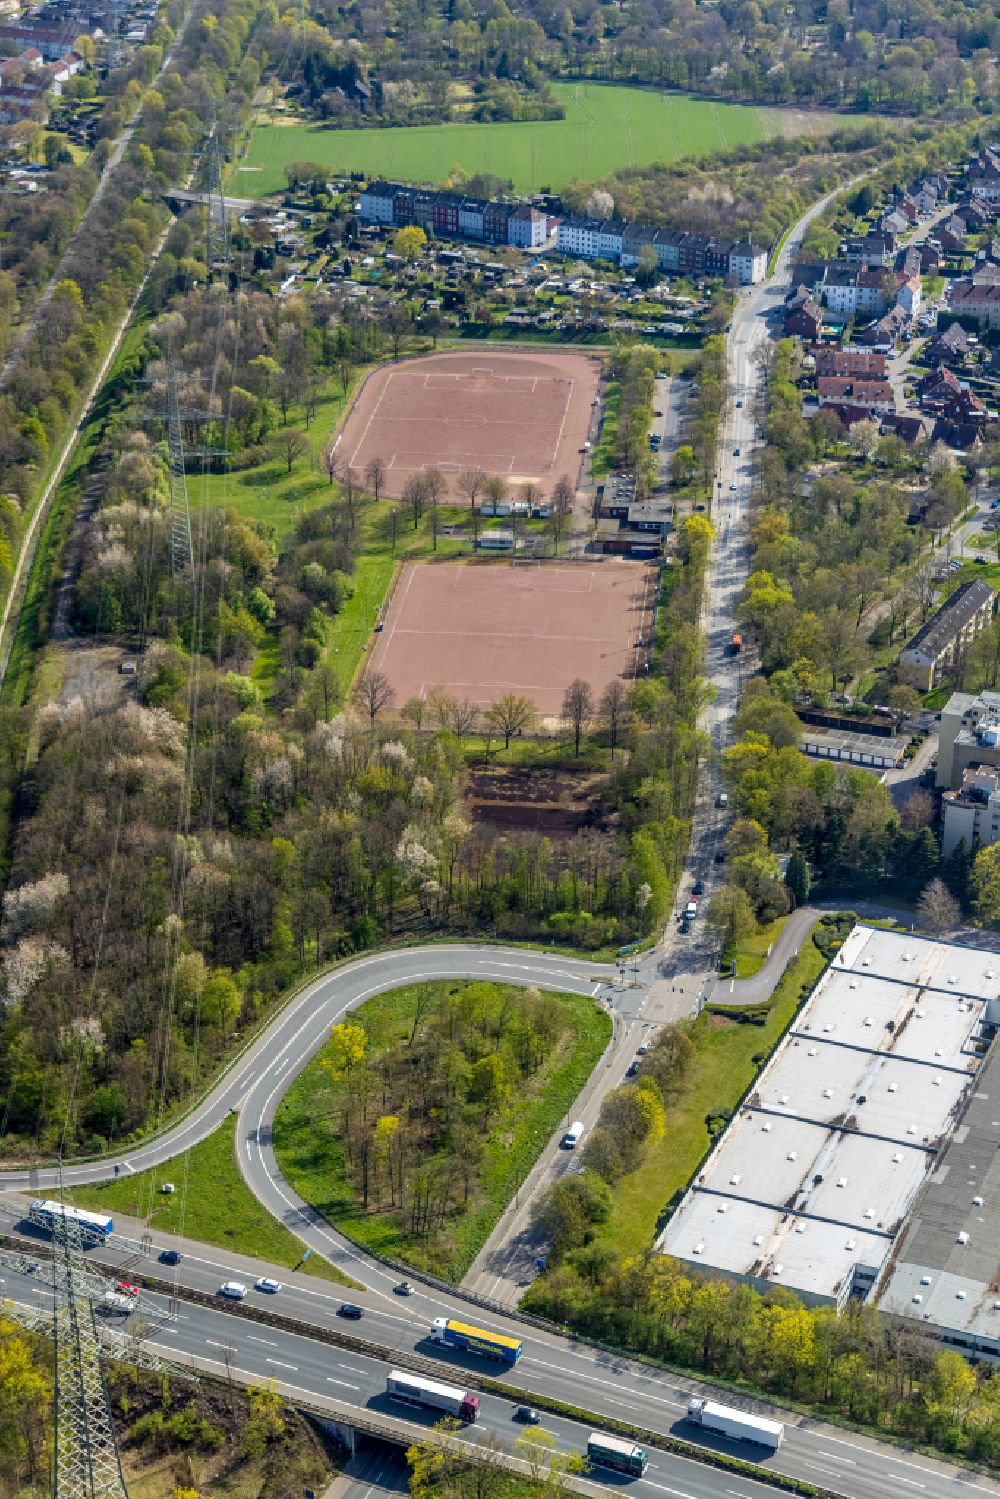 Aerial photograph Gelsenkirchen - Sports grounds and football pitch of Firtinaspor Gelsenkirchen in the district Bulmke-Huellen in Gelsenkirchen at Ruhrgebiet in the state North Rhine-Westphalia, Germany